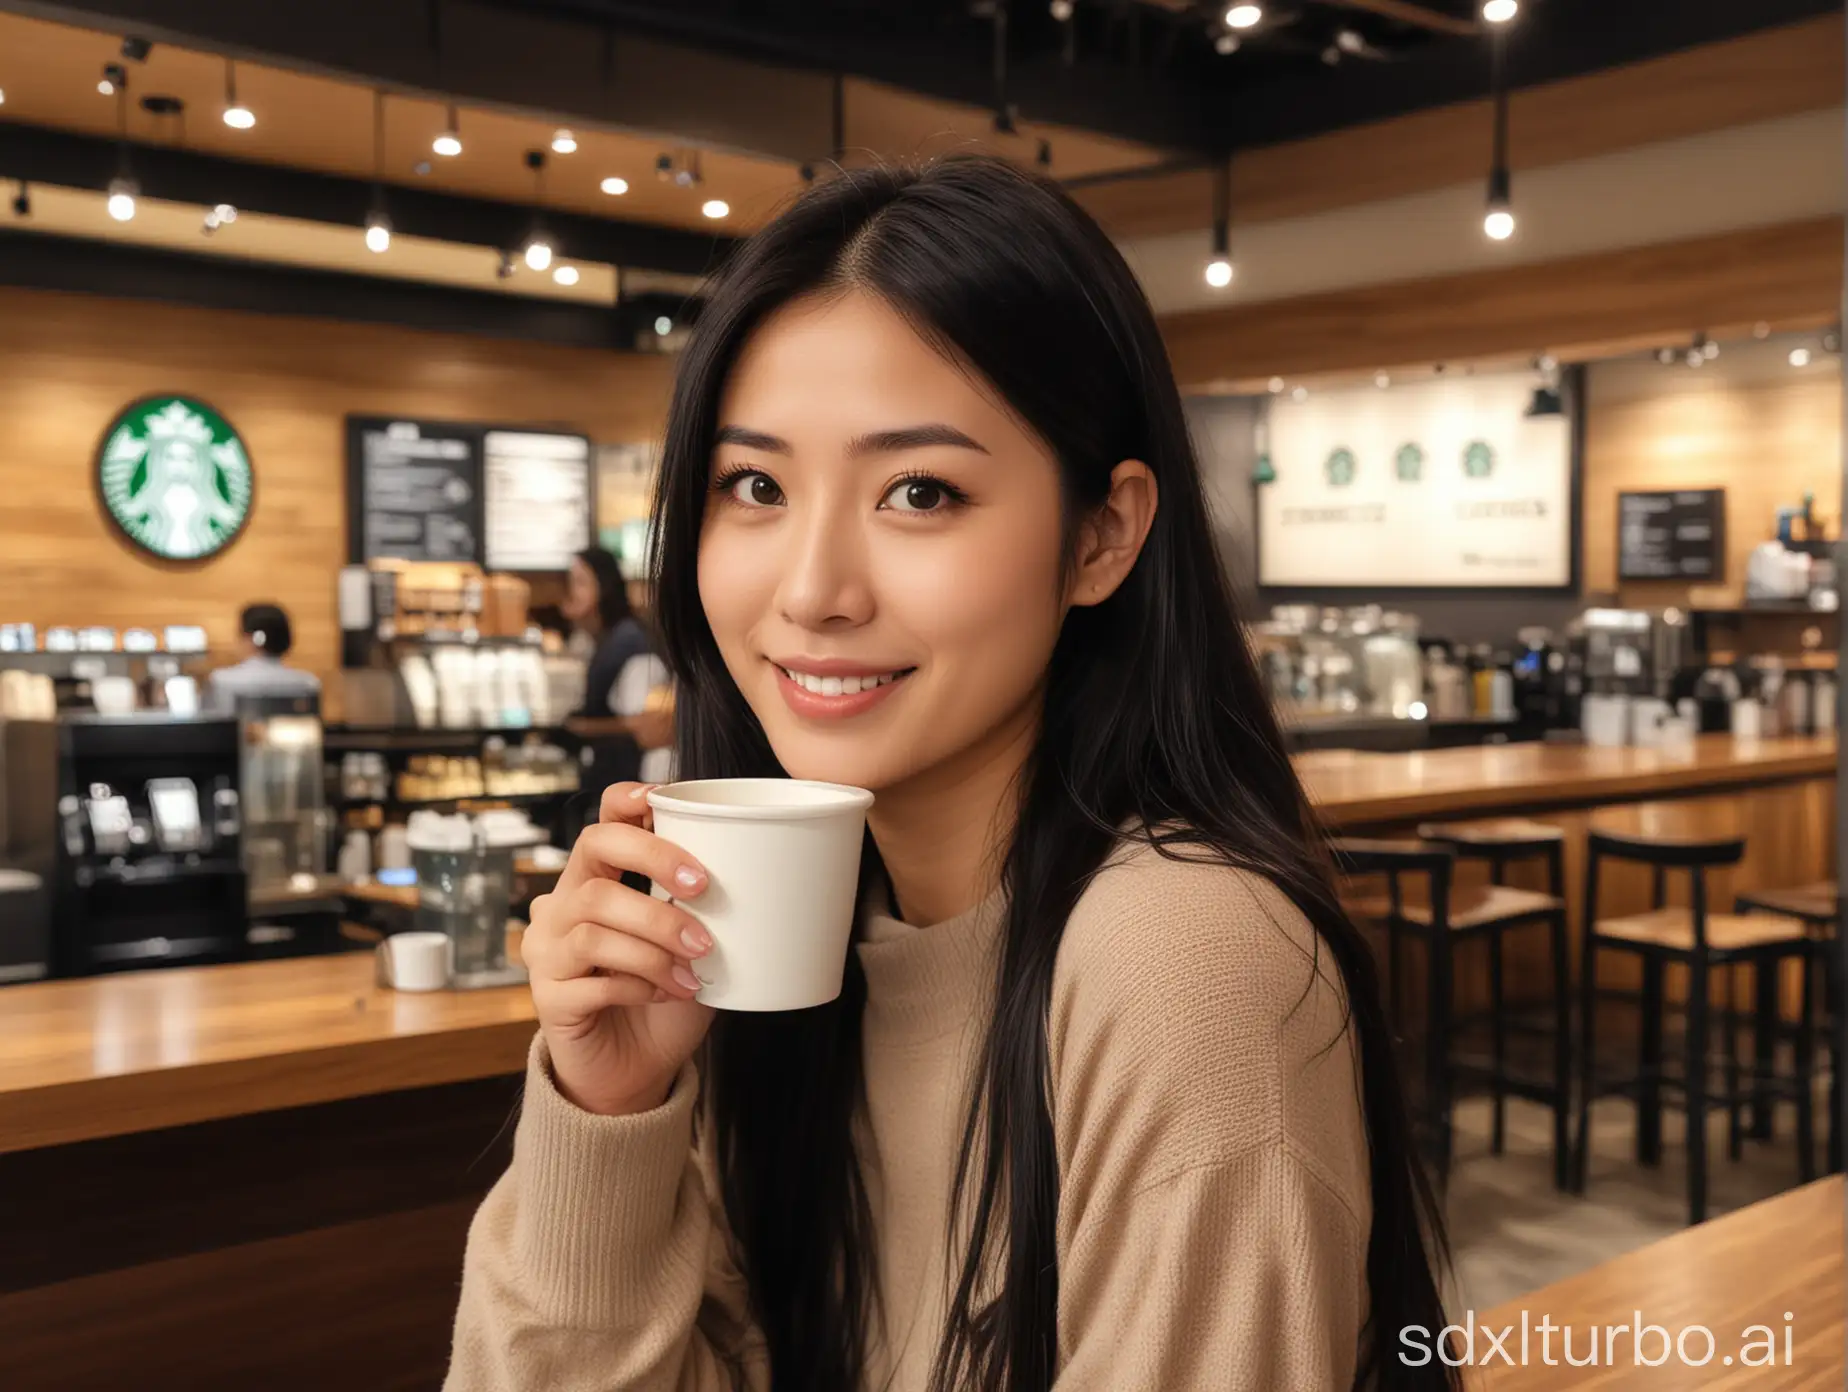 beautiful intellectual typical Japanese 33-year-old girl drinks a cup of Starbucks coffee in Starbucks shop, with guests in background, talking with her friends, smiling, Instagram model, long black hair, warm, black eyes, height 6.5 feets, female, masterpiece, 4k, correct fingers